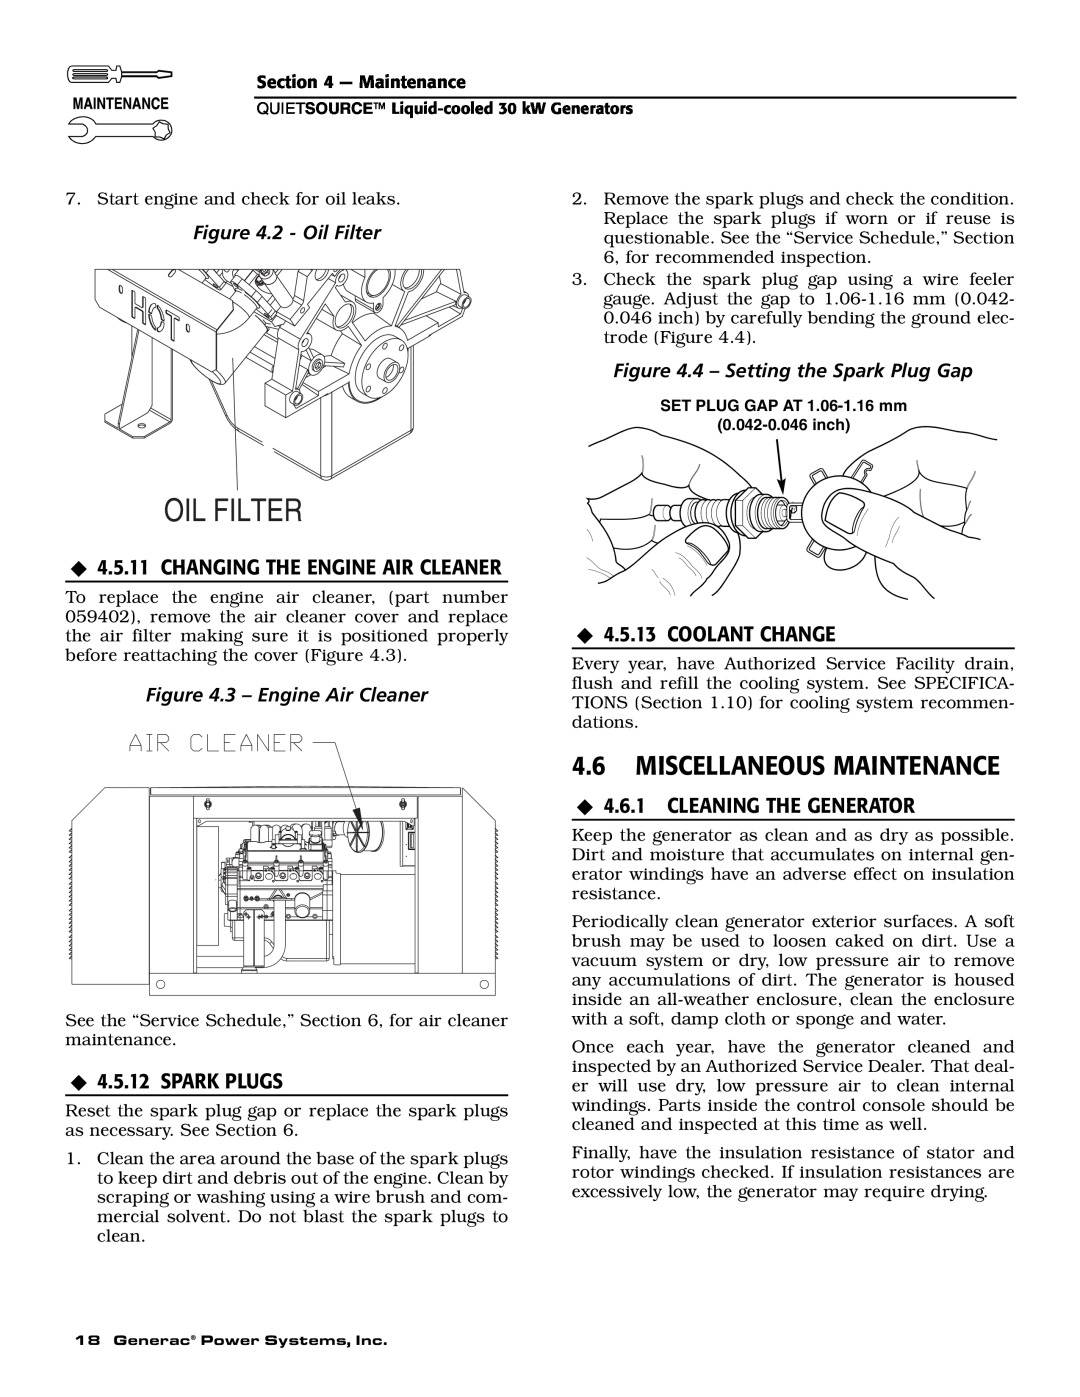 Generac Power Systems 004917-3 4.6MISCELLANEOUS MAINTENANCE, ‹4.5.11 CHANGING THE ENGINE AIR CLEANER, ‹4.5.12 SPARK PLUGS 